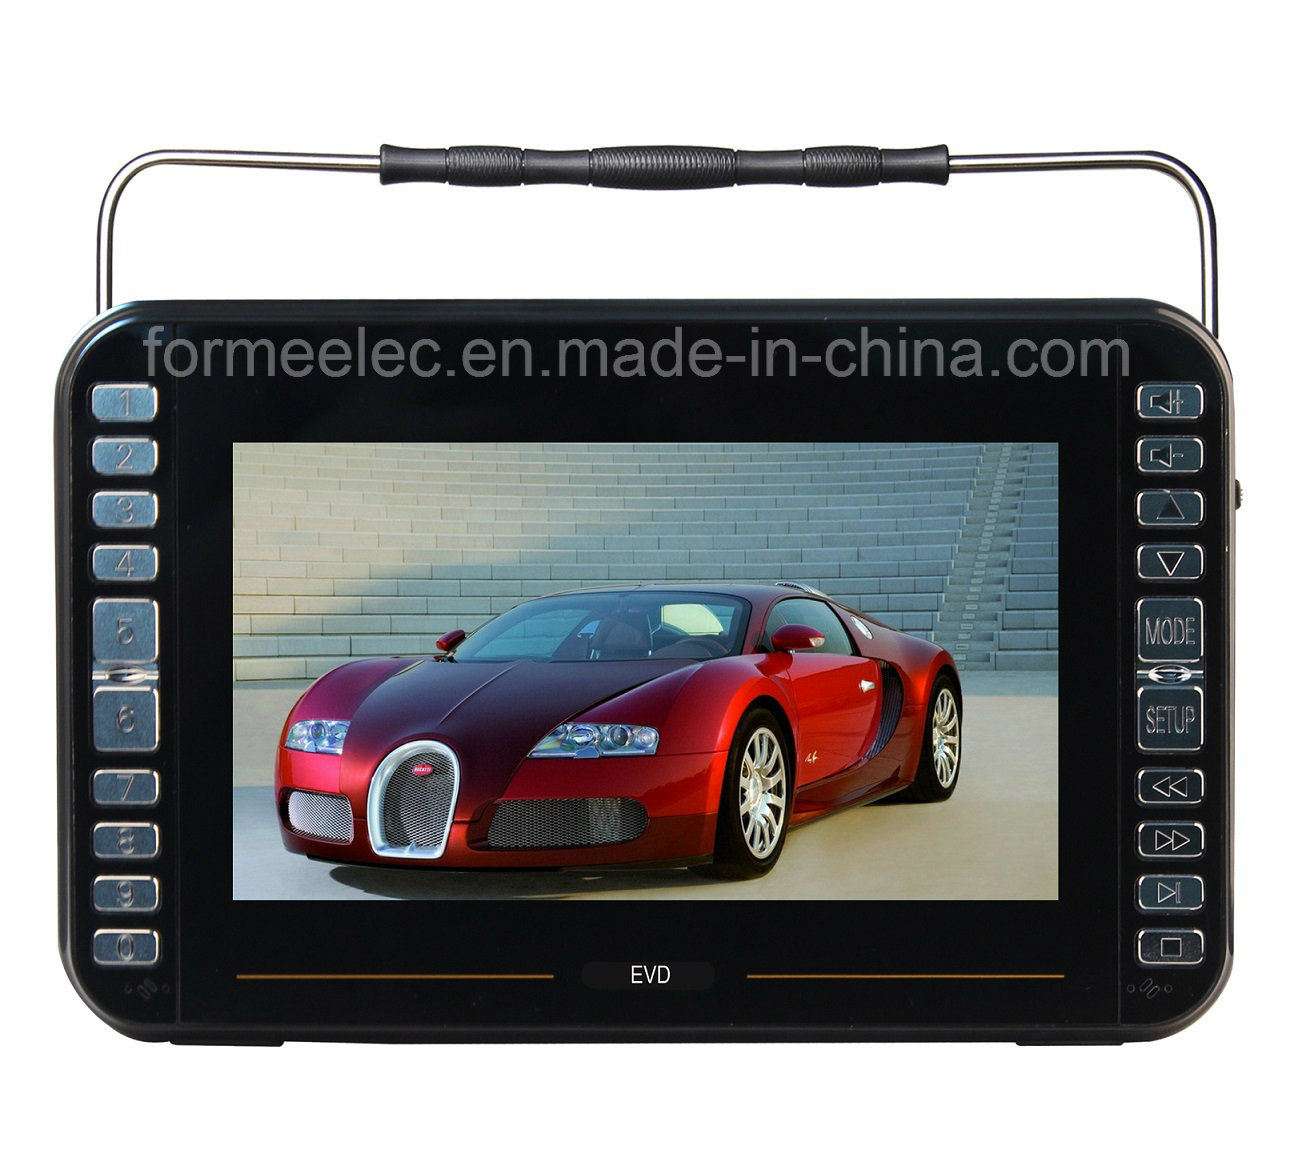 10.1 Inch MP3 MP4 MP5 Portable DVD Player with ISDB-TV